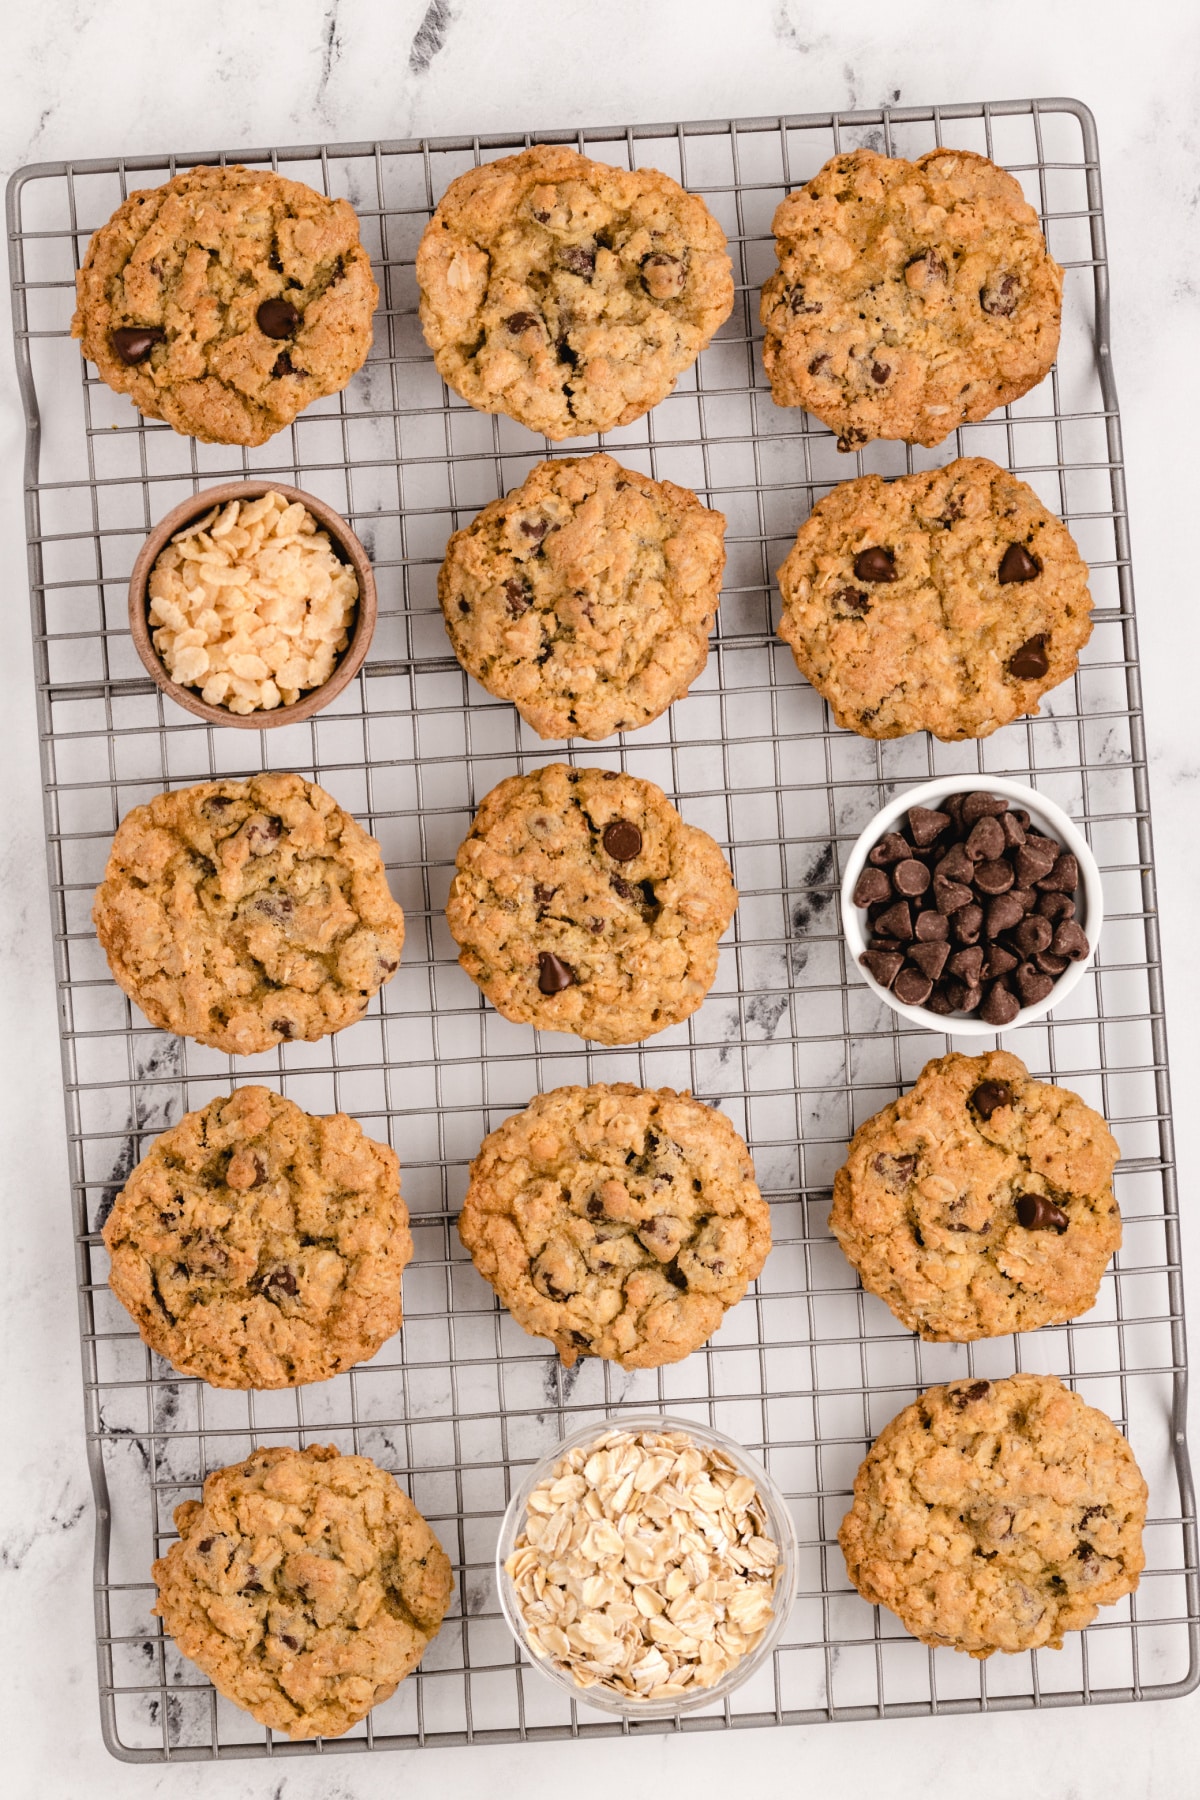 Oatmeal chocolate chip cookies with Rice Krispies